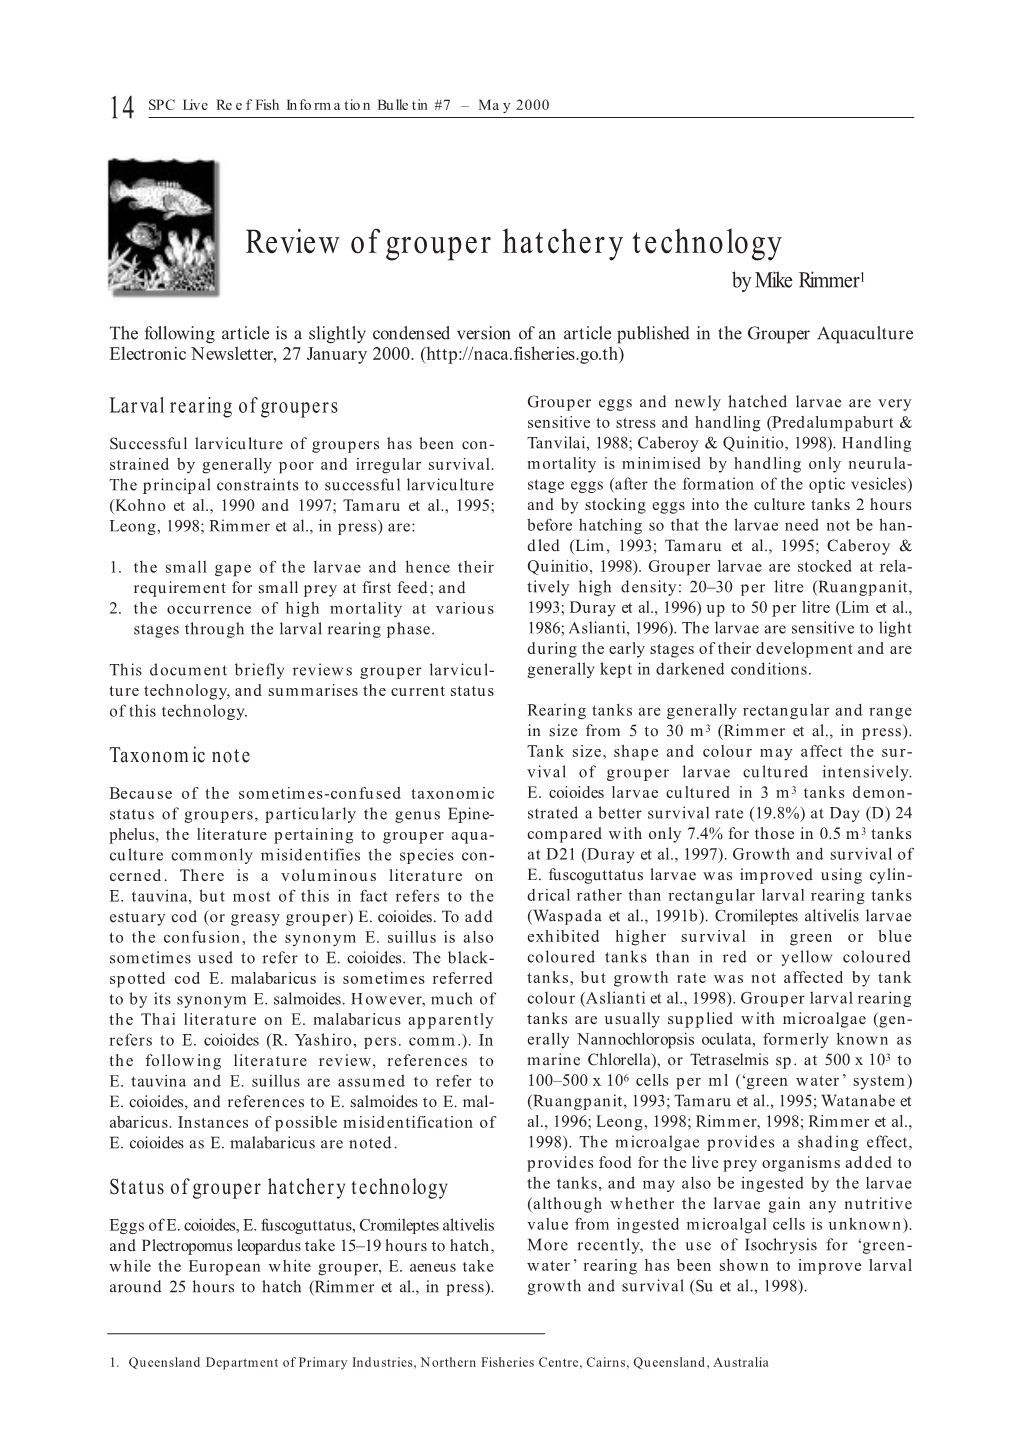 Review of Grouper Hatchery Technology by Mike Rimmer1